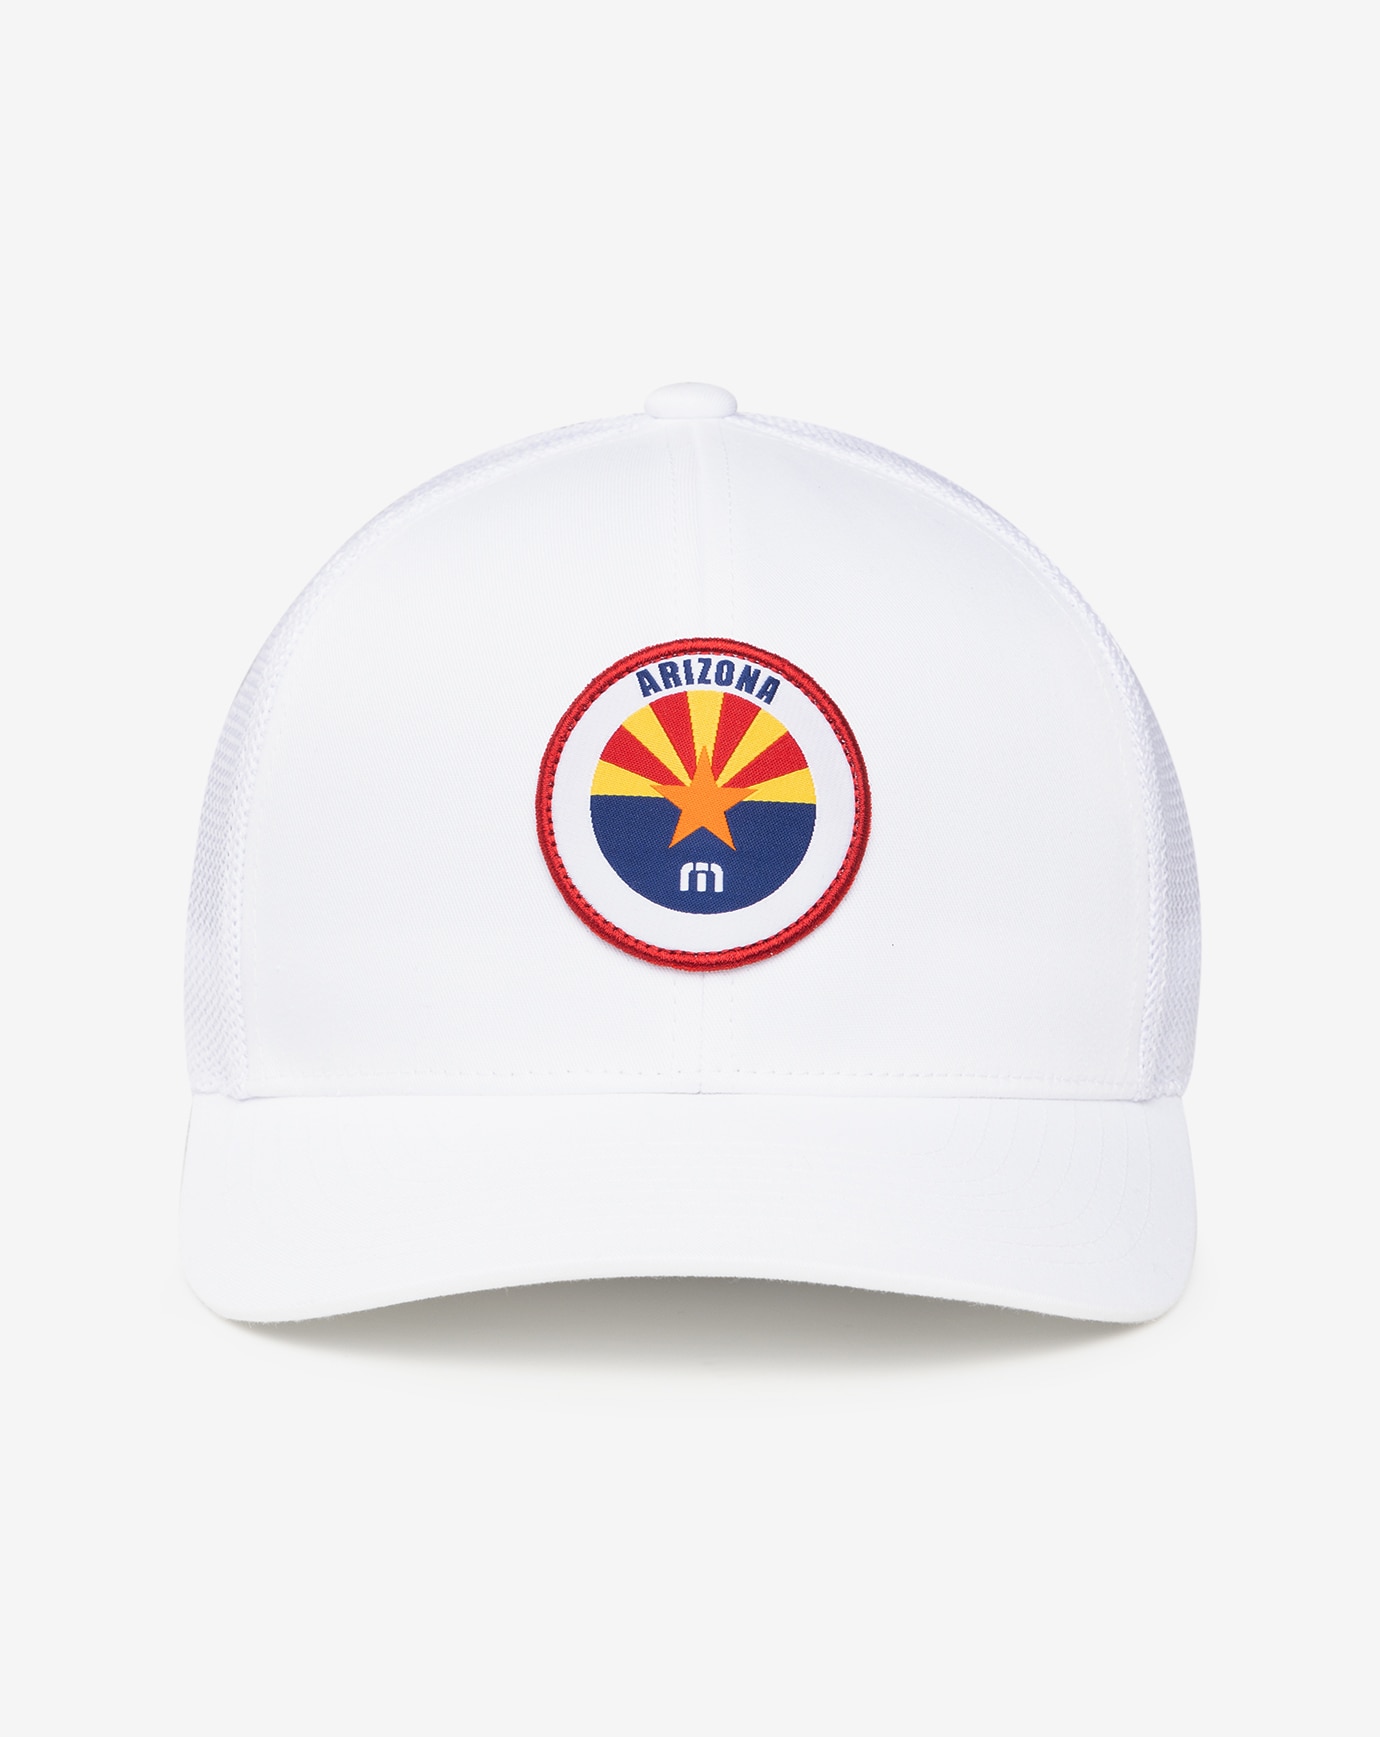 Related Product - PRICKLY PEAR SNAPBACK HAT